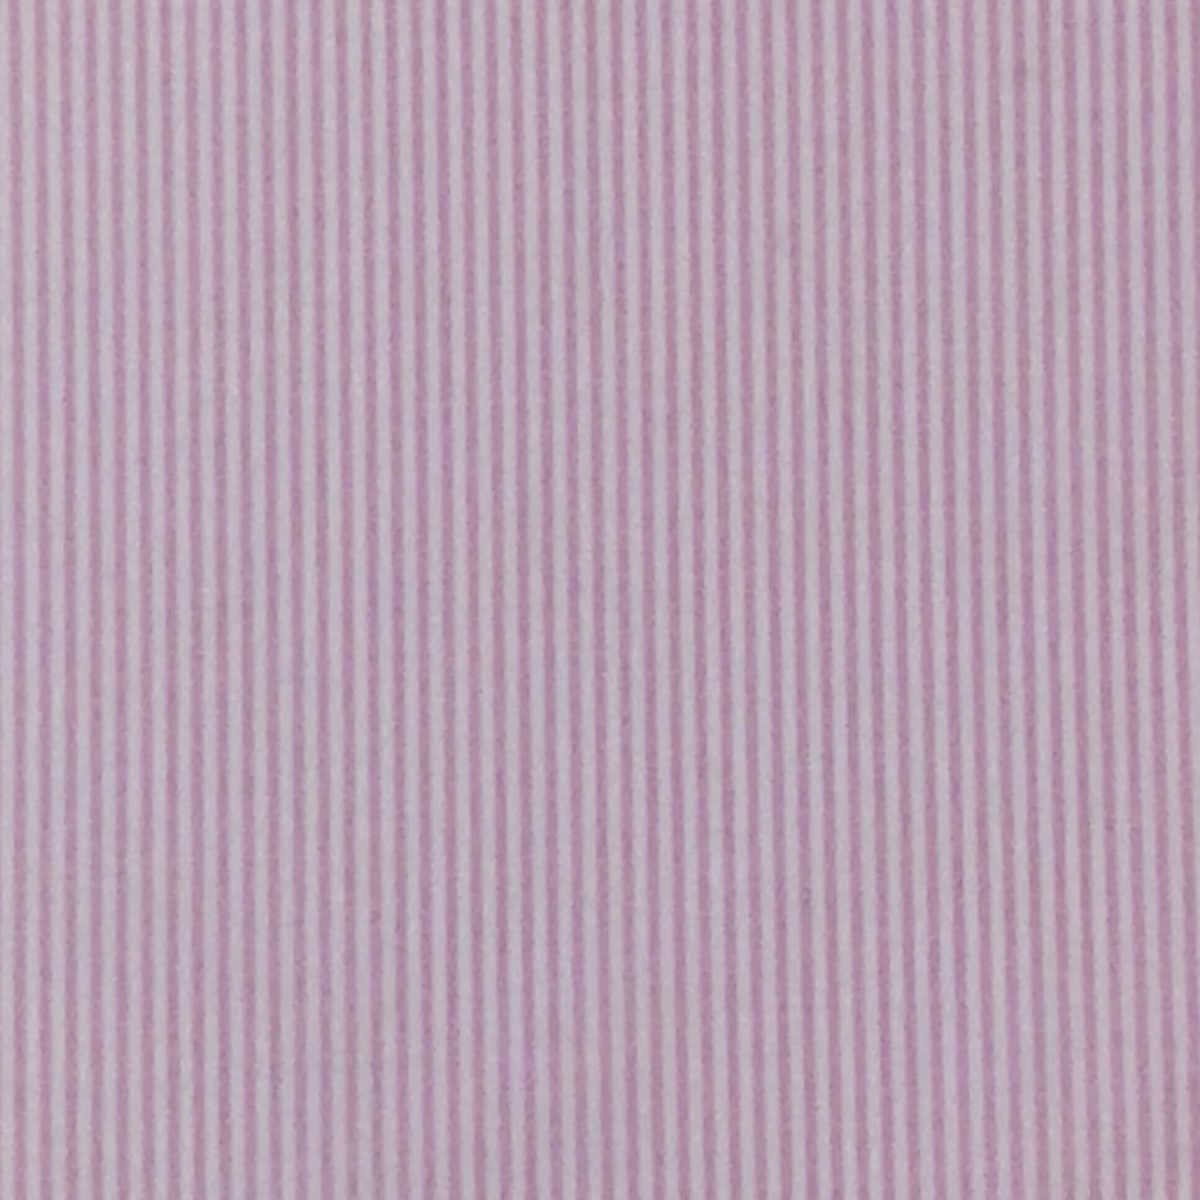 Fabric-Swatch-Cotton-Stripes-Pink-and-White-Cotton